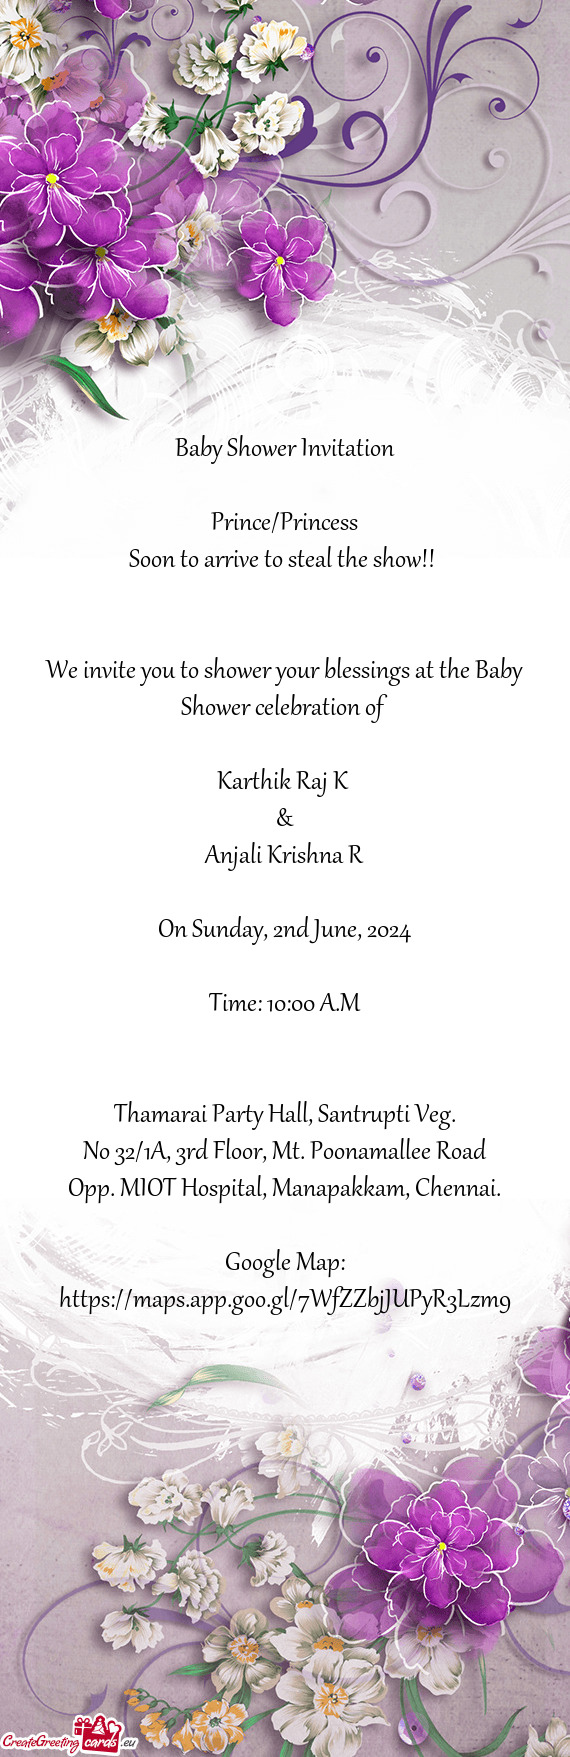 We invite you to shower your blessings at the Baby Shower celebration of